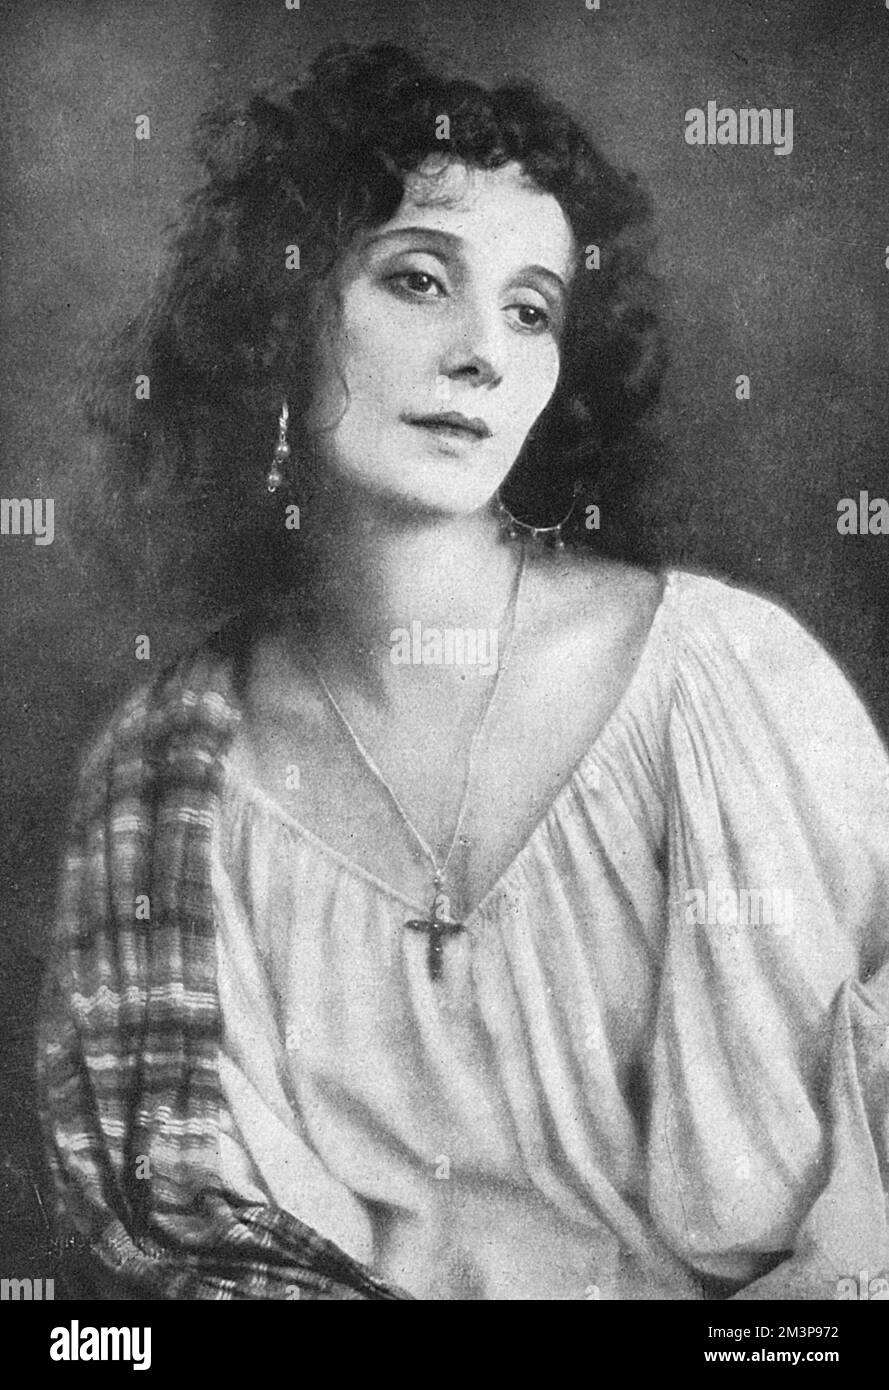 Anna Pavlova (1881-1931) Russian ballet dancer pictured in 1921.     Date: 1921 Stock Photo